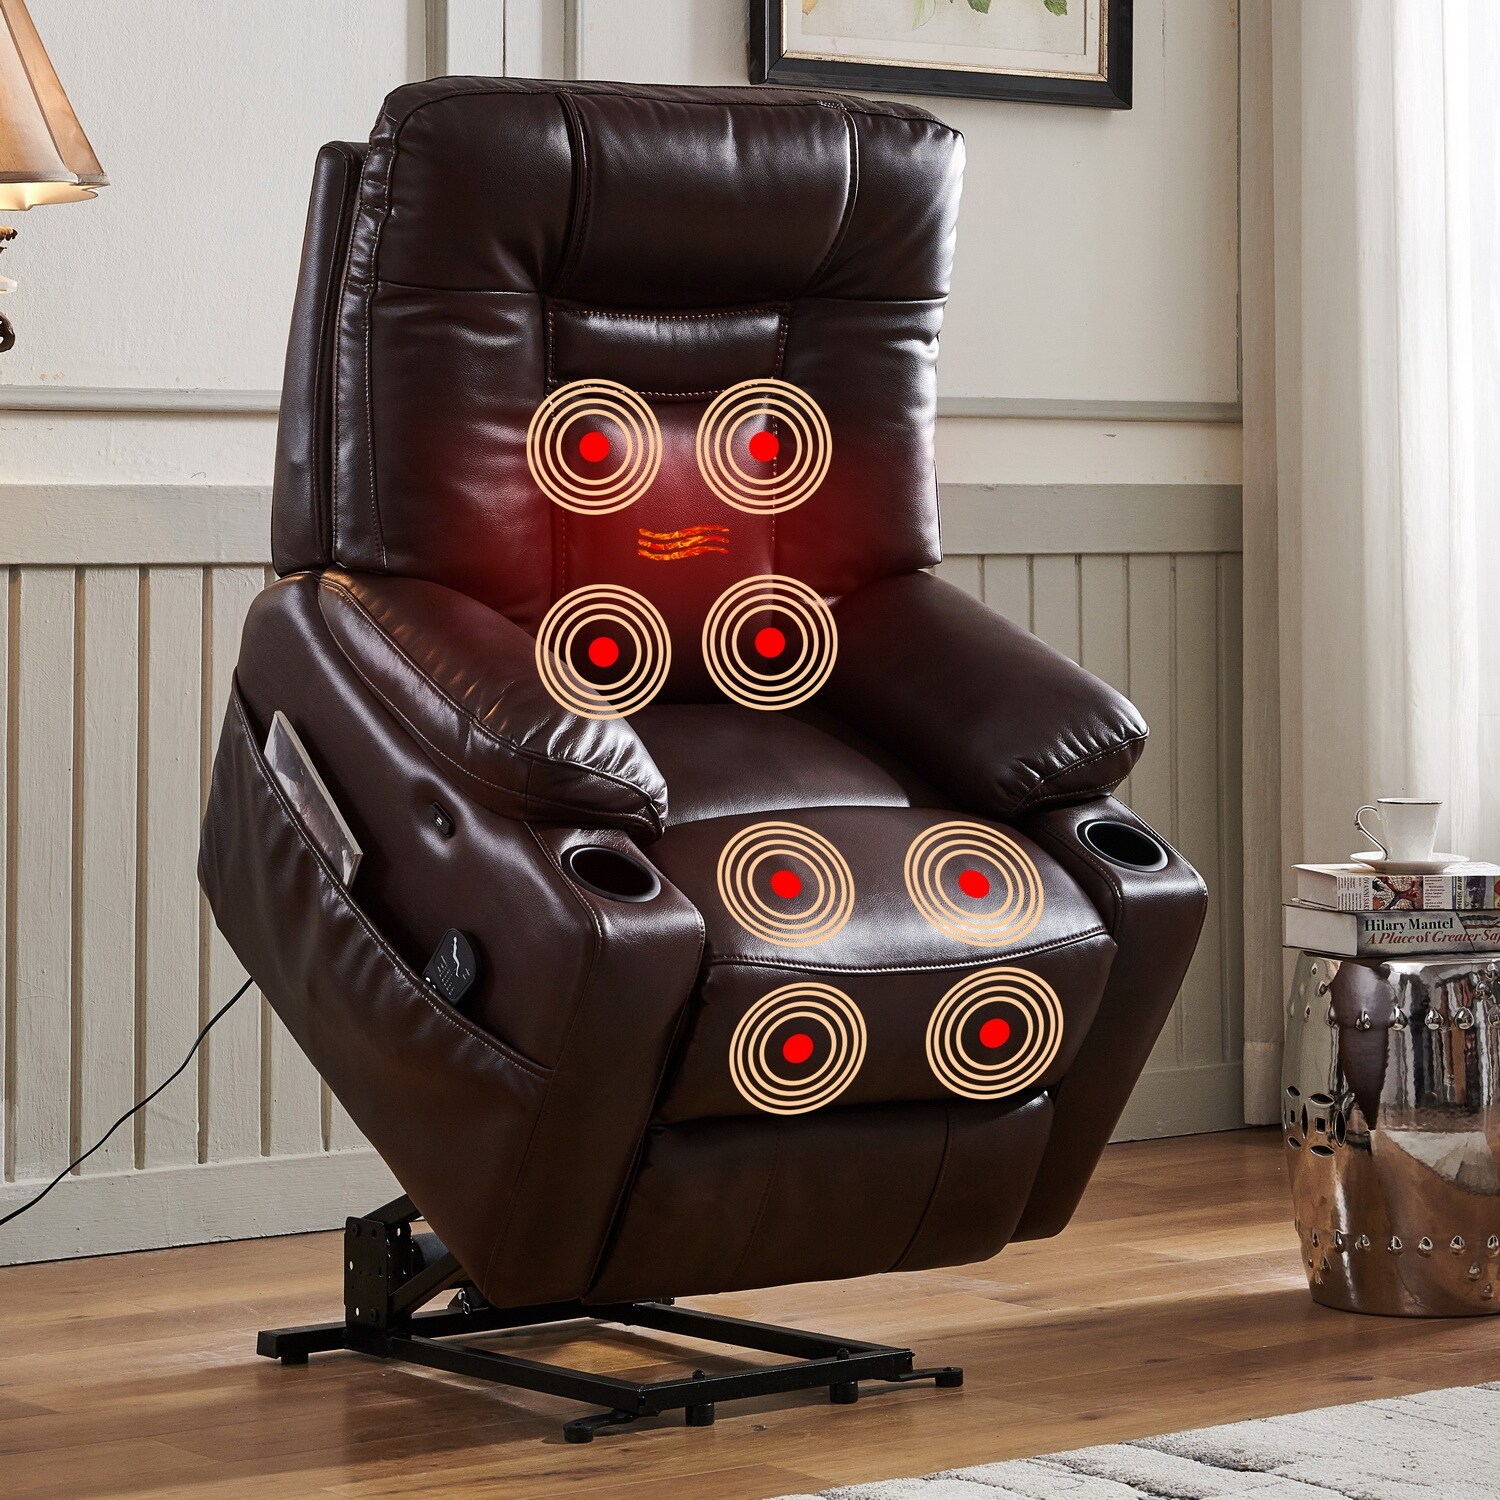 https://ak1.ostkcdn.com/images/products/is/images/direct/6a605eff75858f68f634576d7b4fa4562d2ffc3c/Brown-Leather-Gel-Power-Lift-Recliner-Chair-with-Massage-and-Heat.jpg